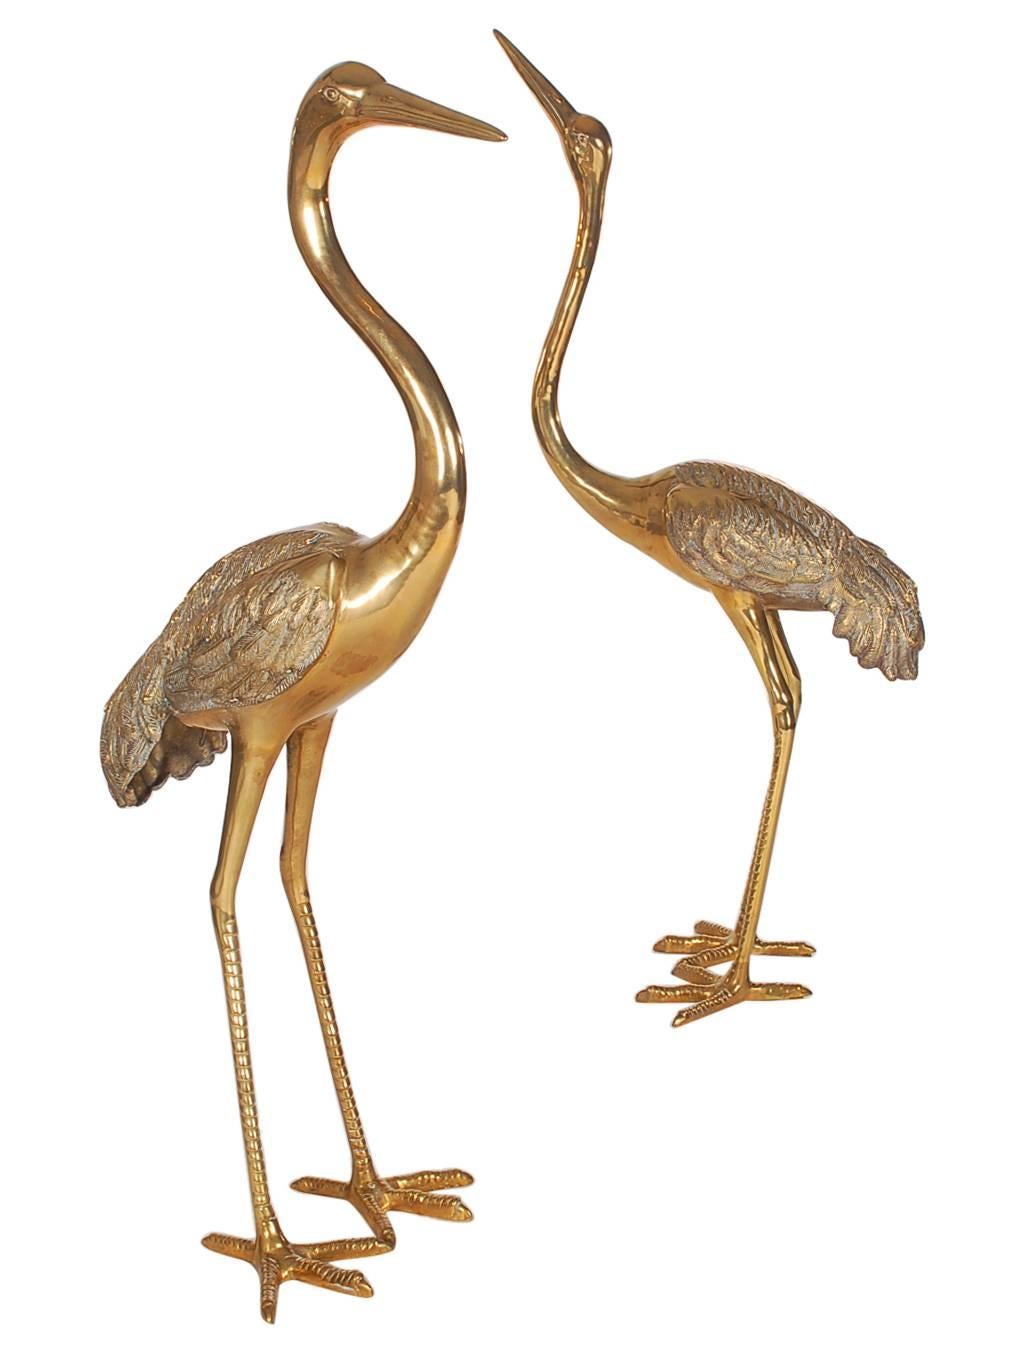 An attractive complementing pair of brass crane statues. The feature heavy brass cast forms with great detailing. Price includes the pair.